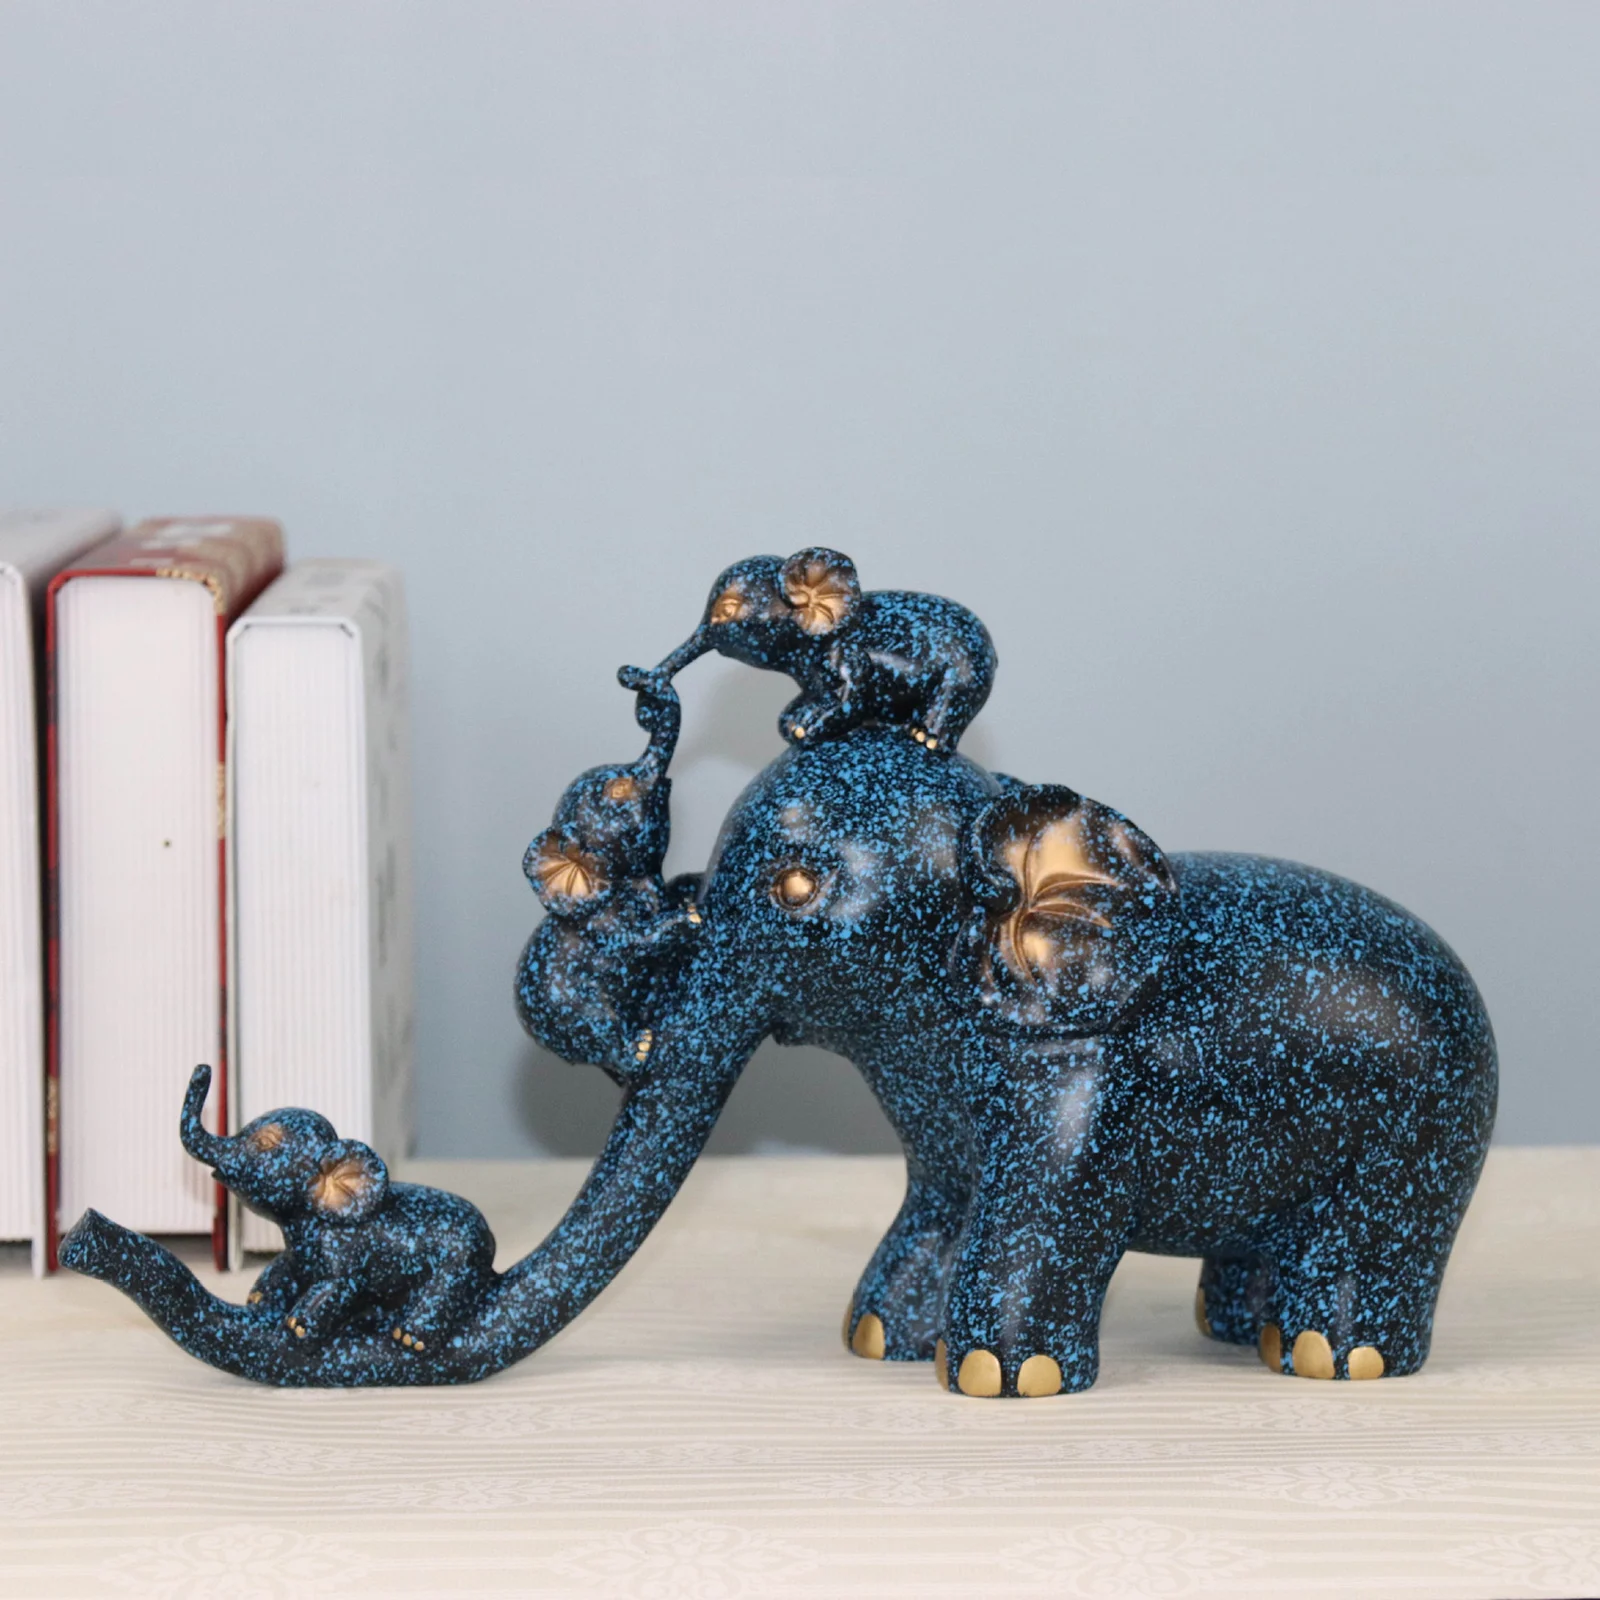 Elephant Mother and Babies Figurine Office Home Tabletop Animal Statue Decor